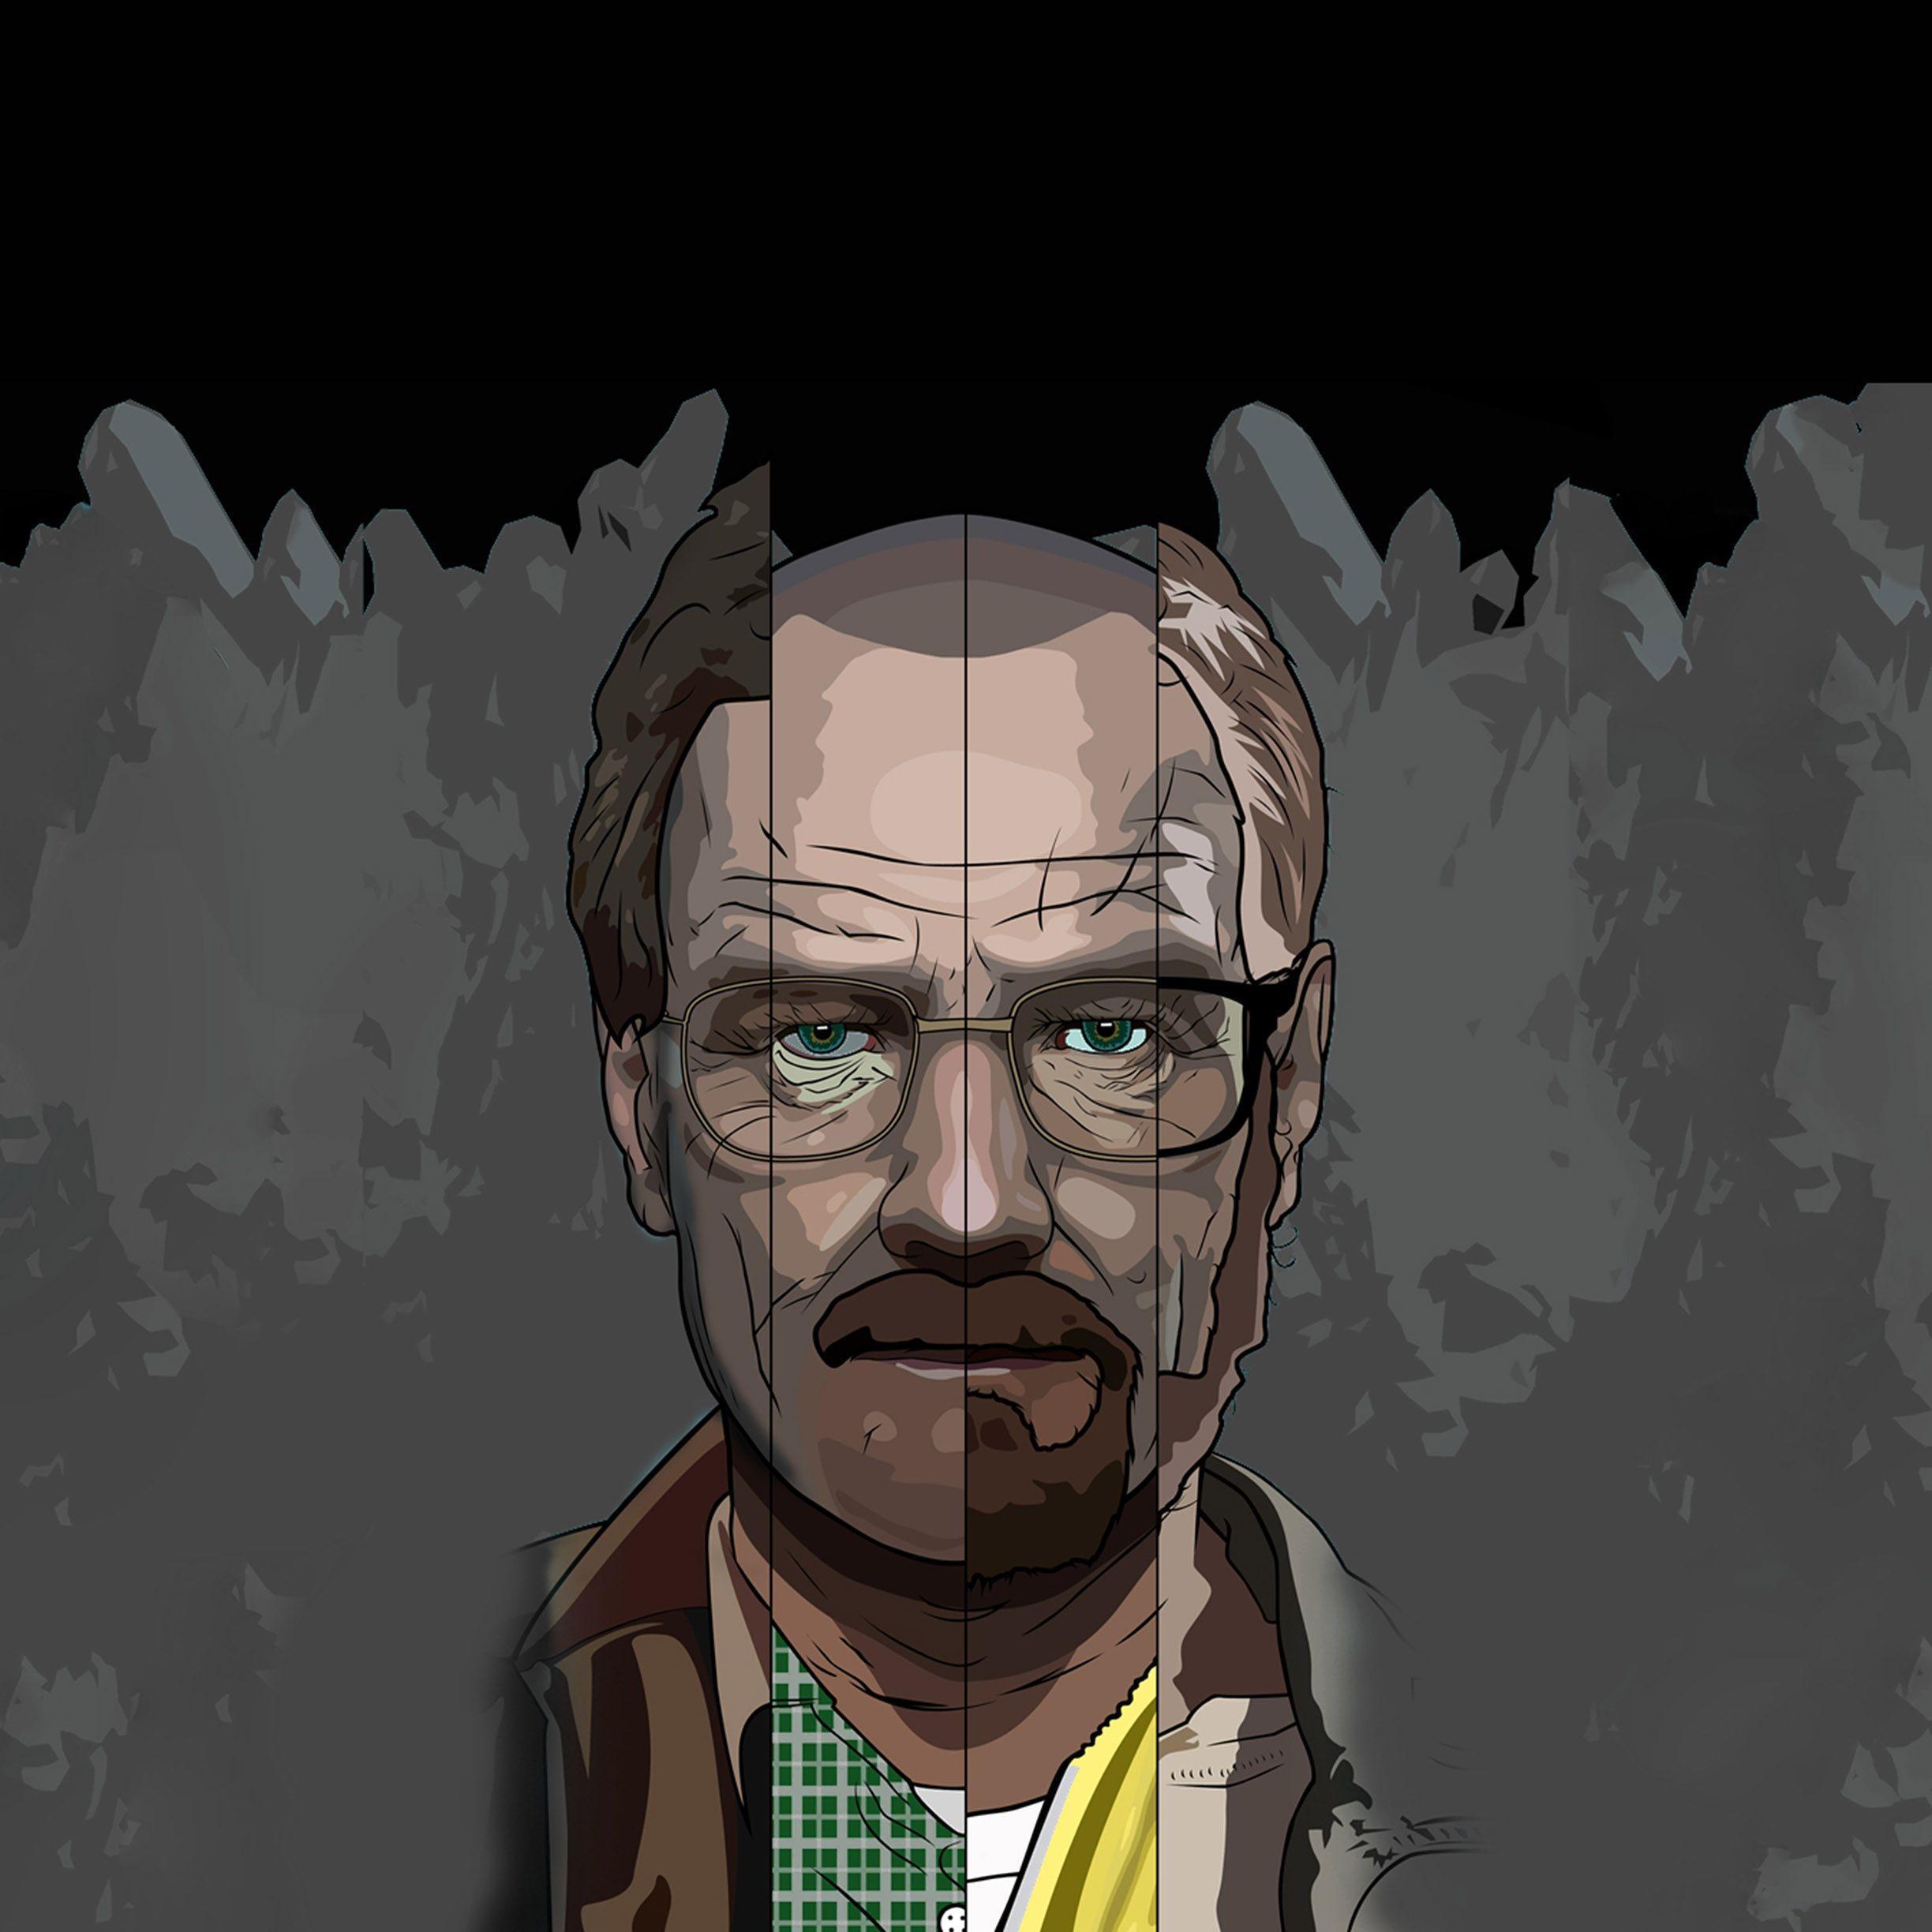 Breaking Bad wallpaper for iPhone and iPad